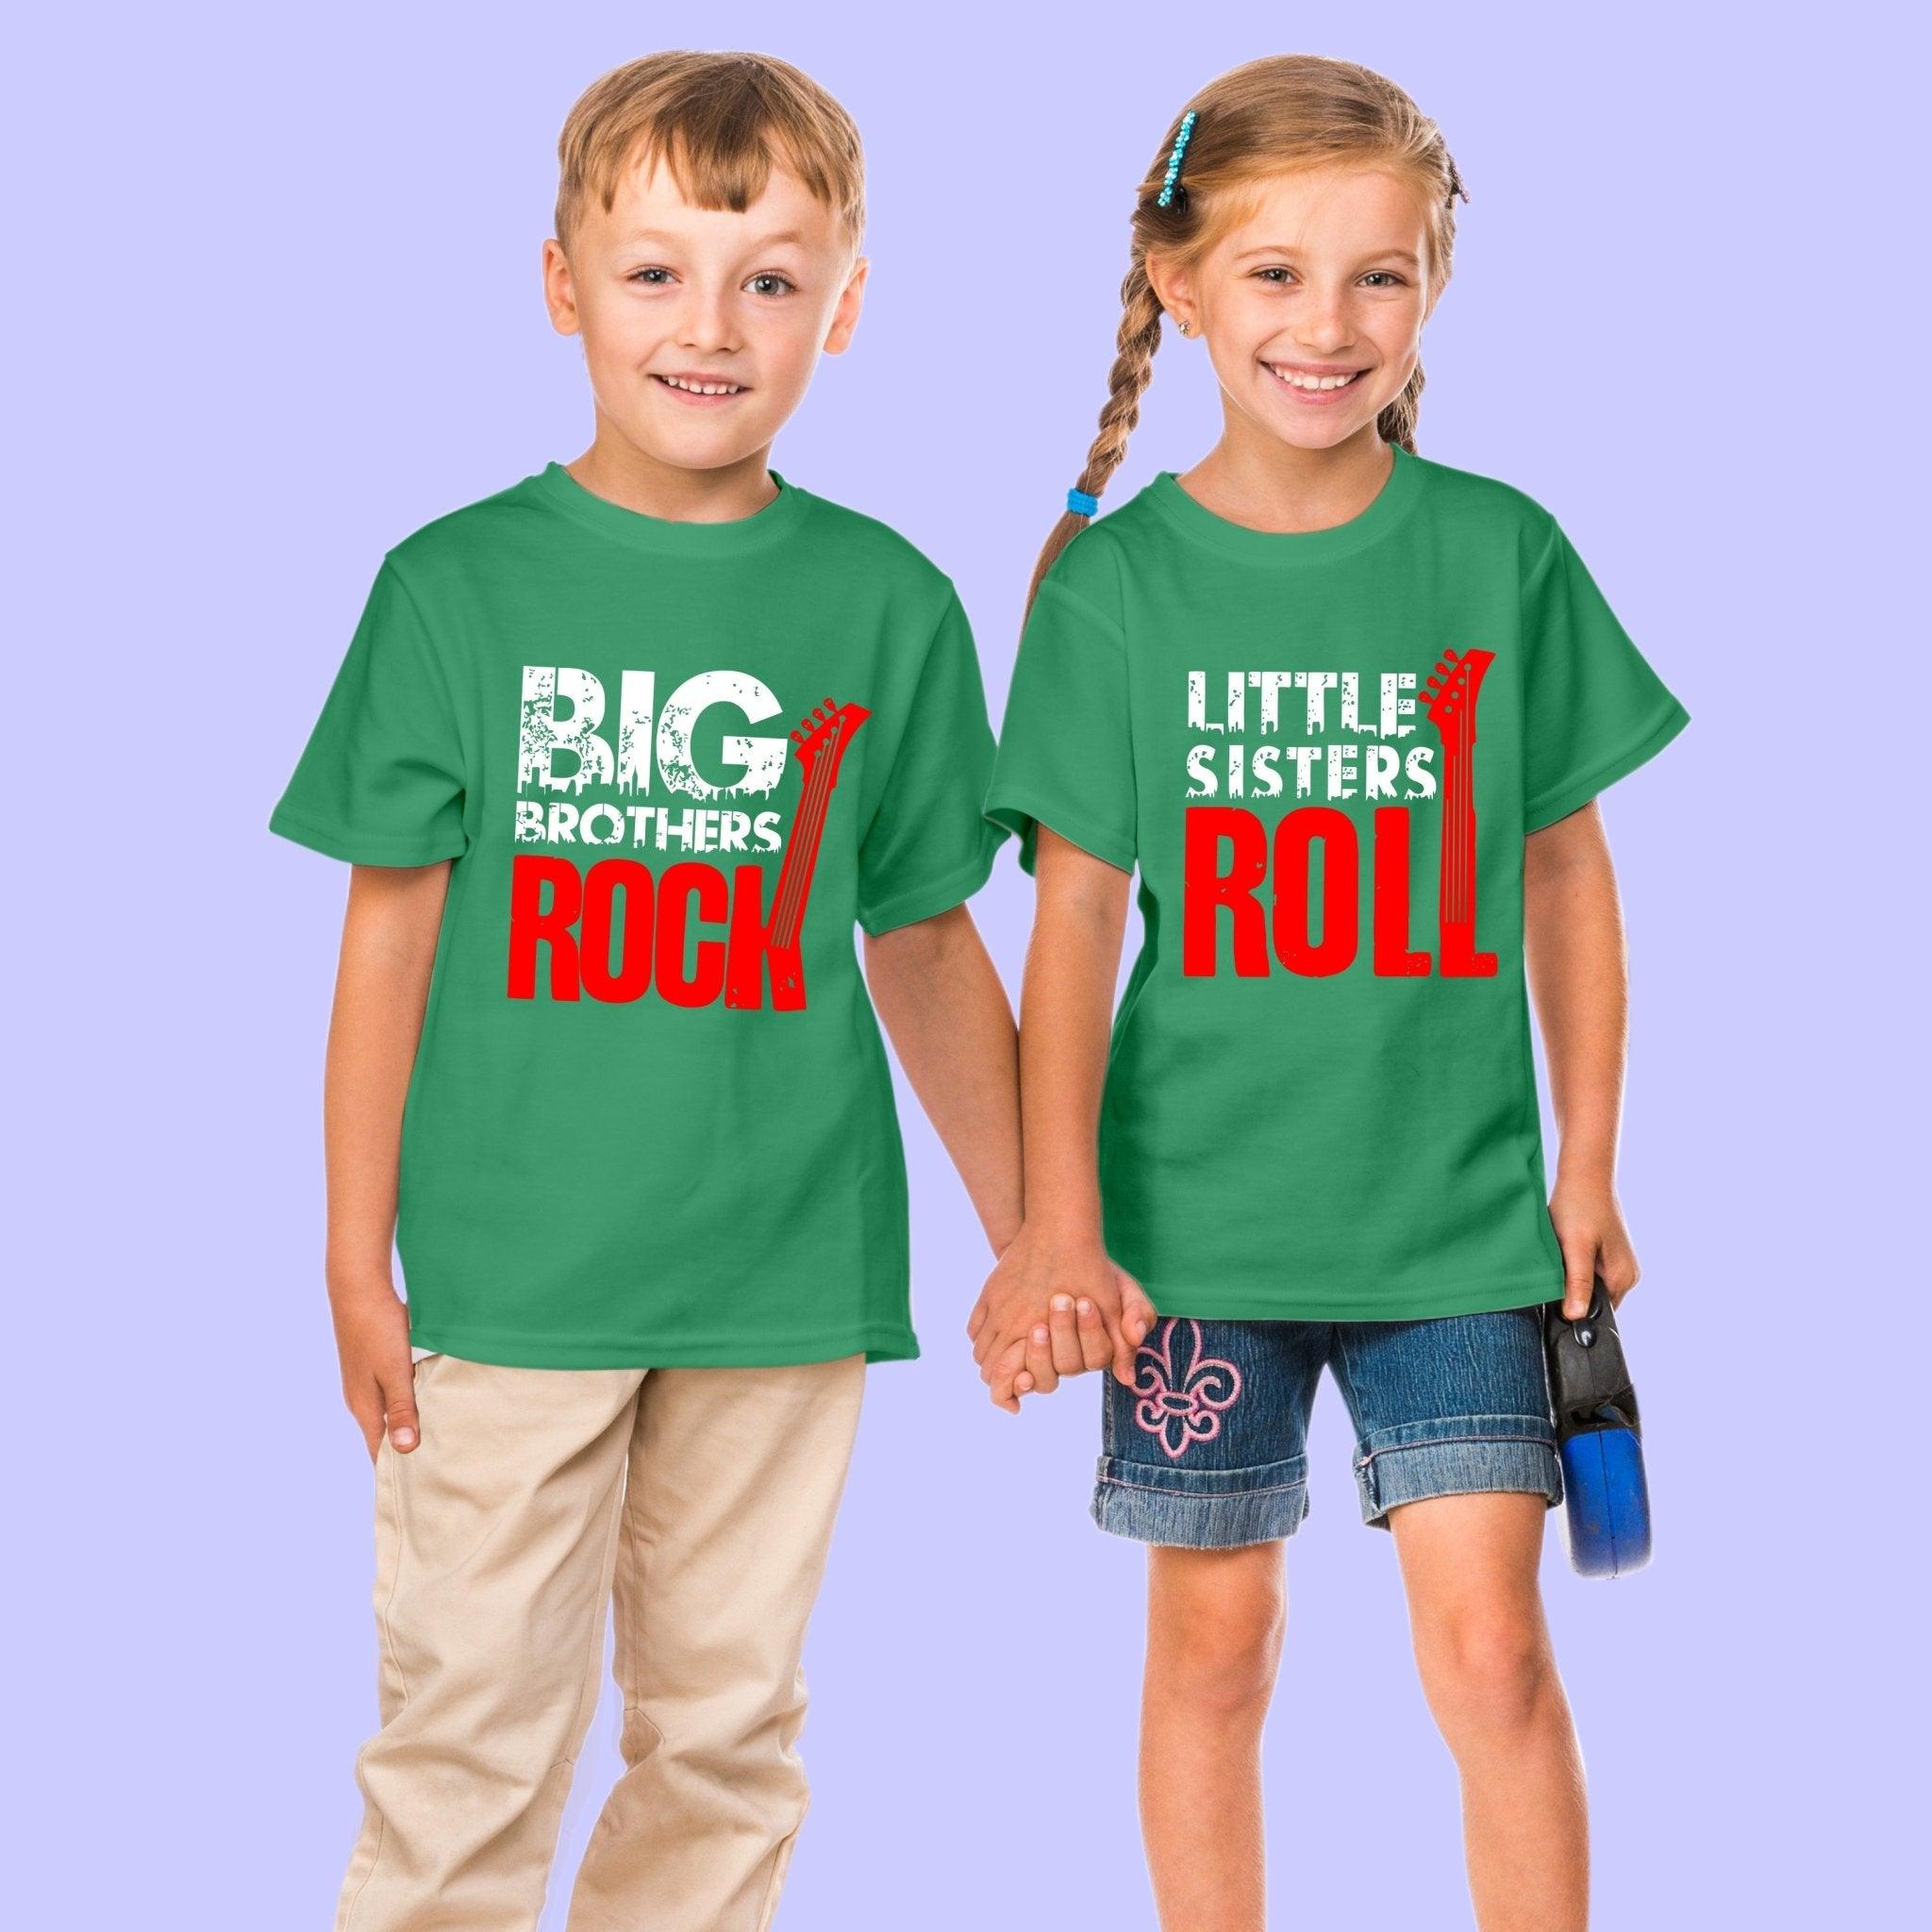 Sibling T Shirt for Kids Brother and Sister in Green Colour - Big Brother Rocks Little Sister Rolls